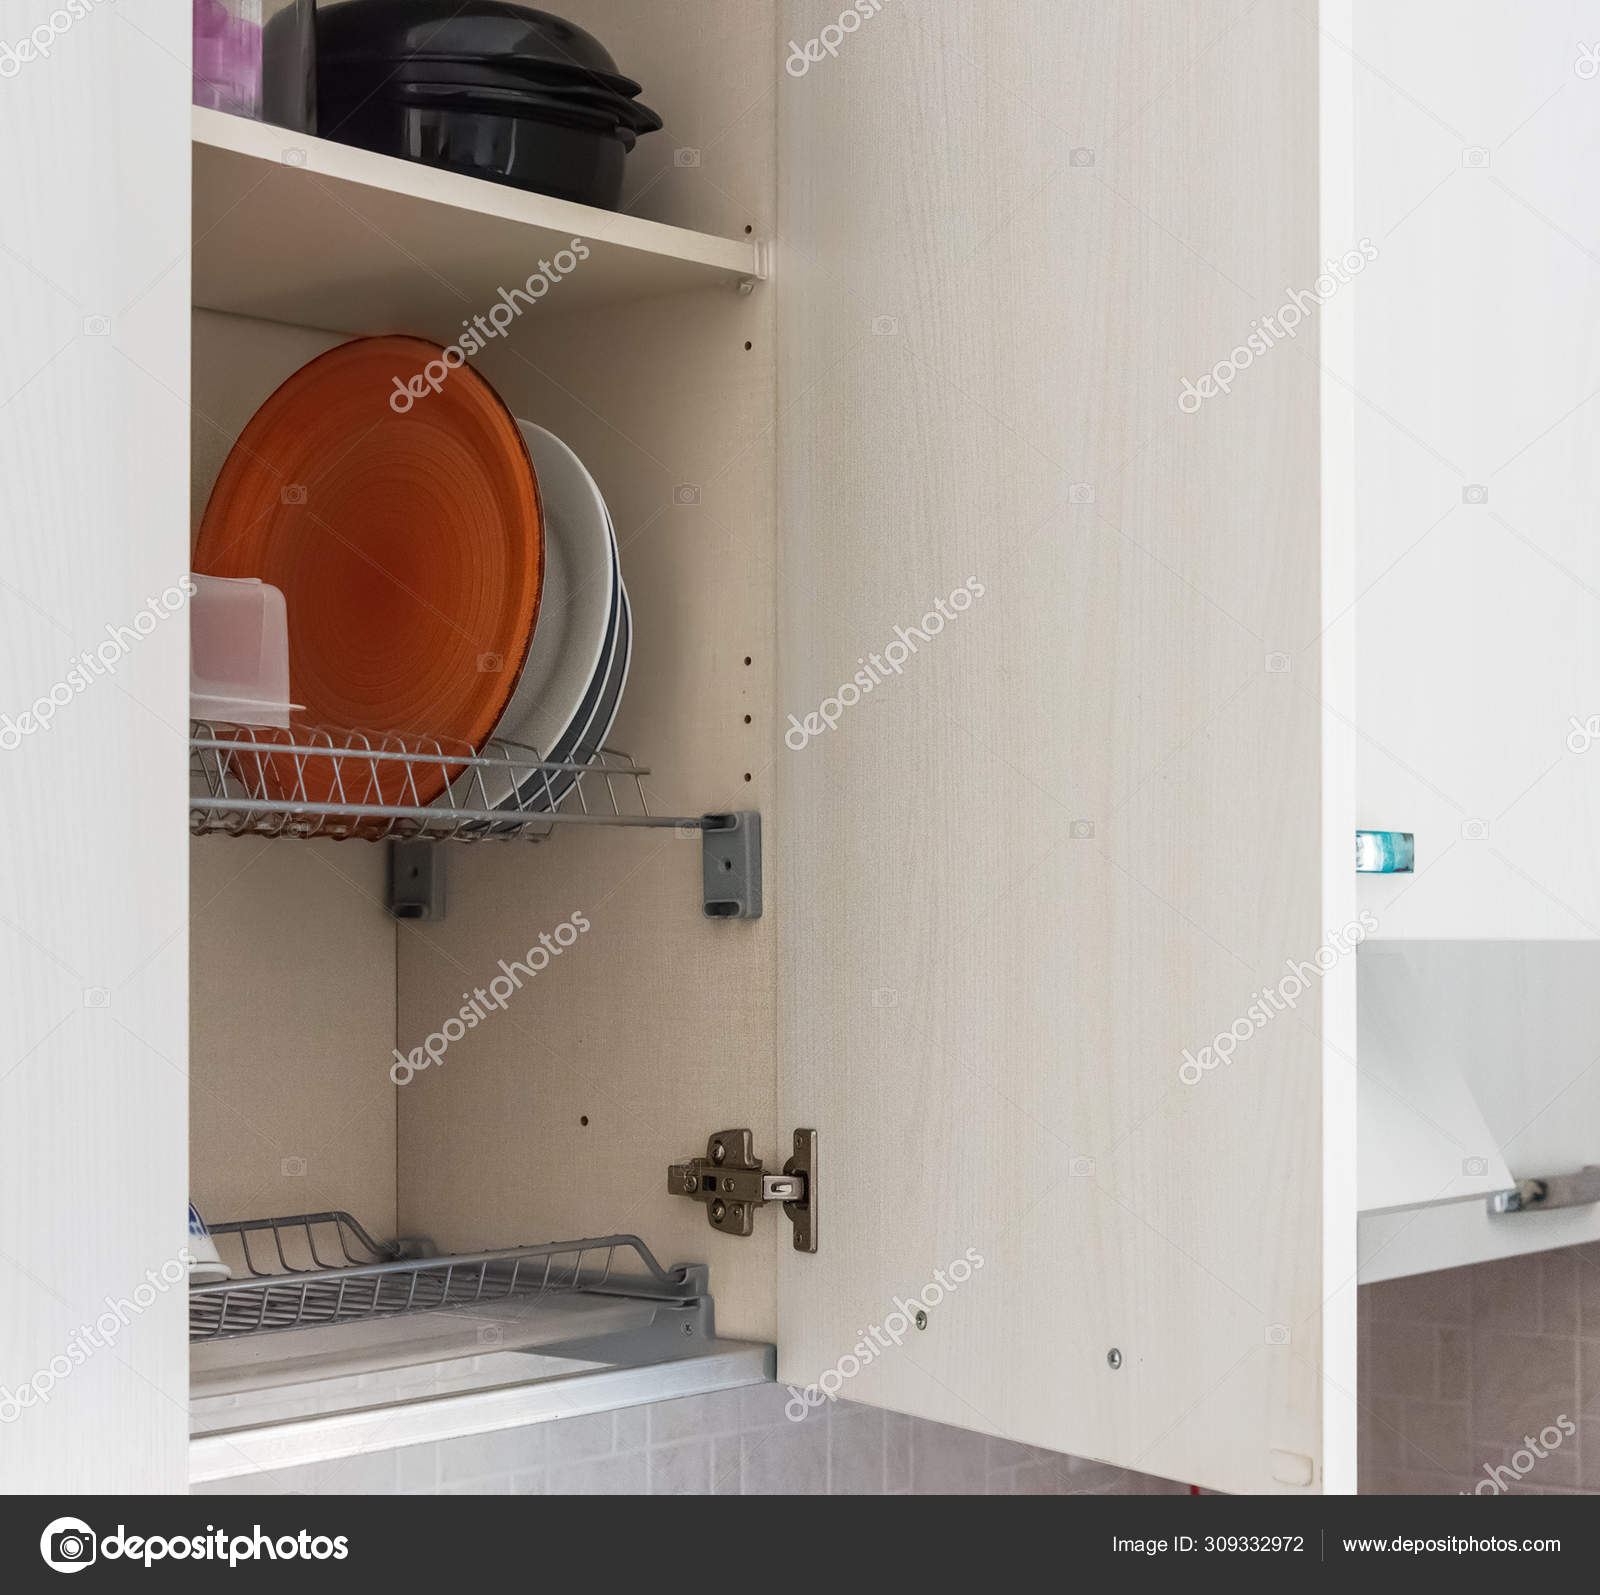 Dish Drying On A Metal Dish Rack In A White Kitchen Cabinet